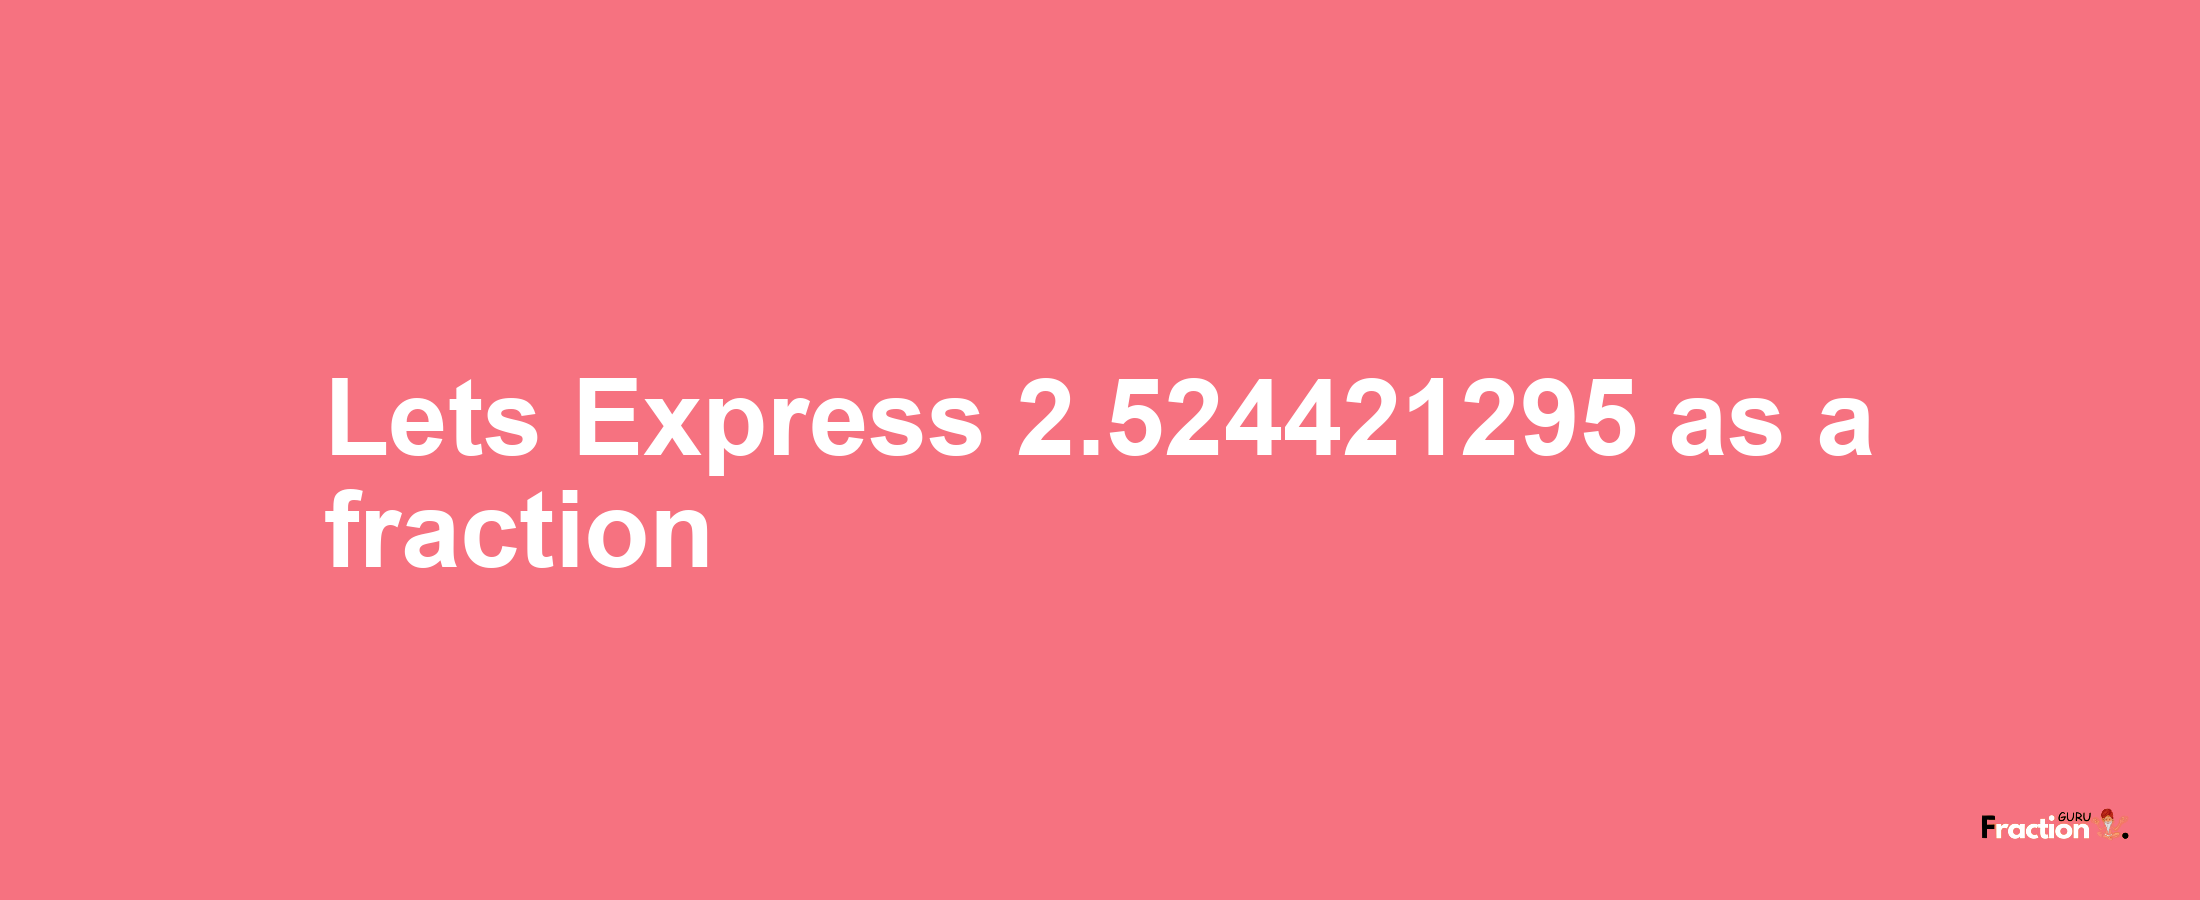 Lets Express 2.524421295 as afraction